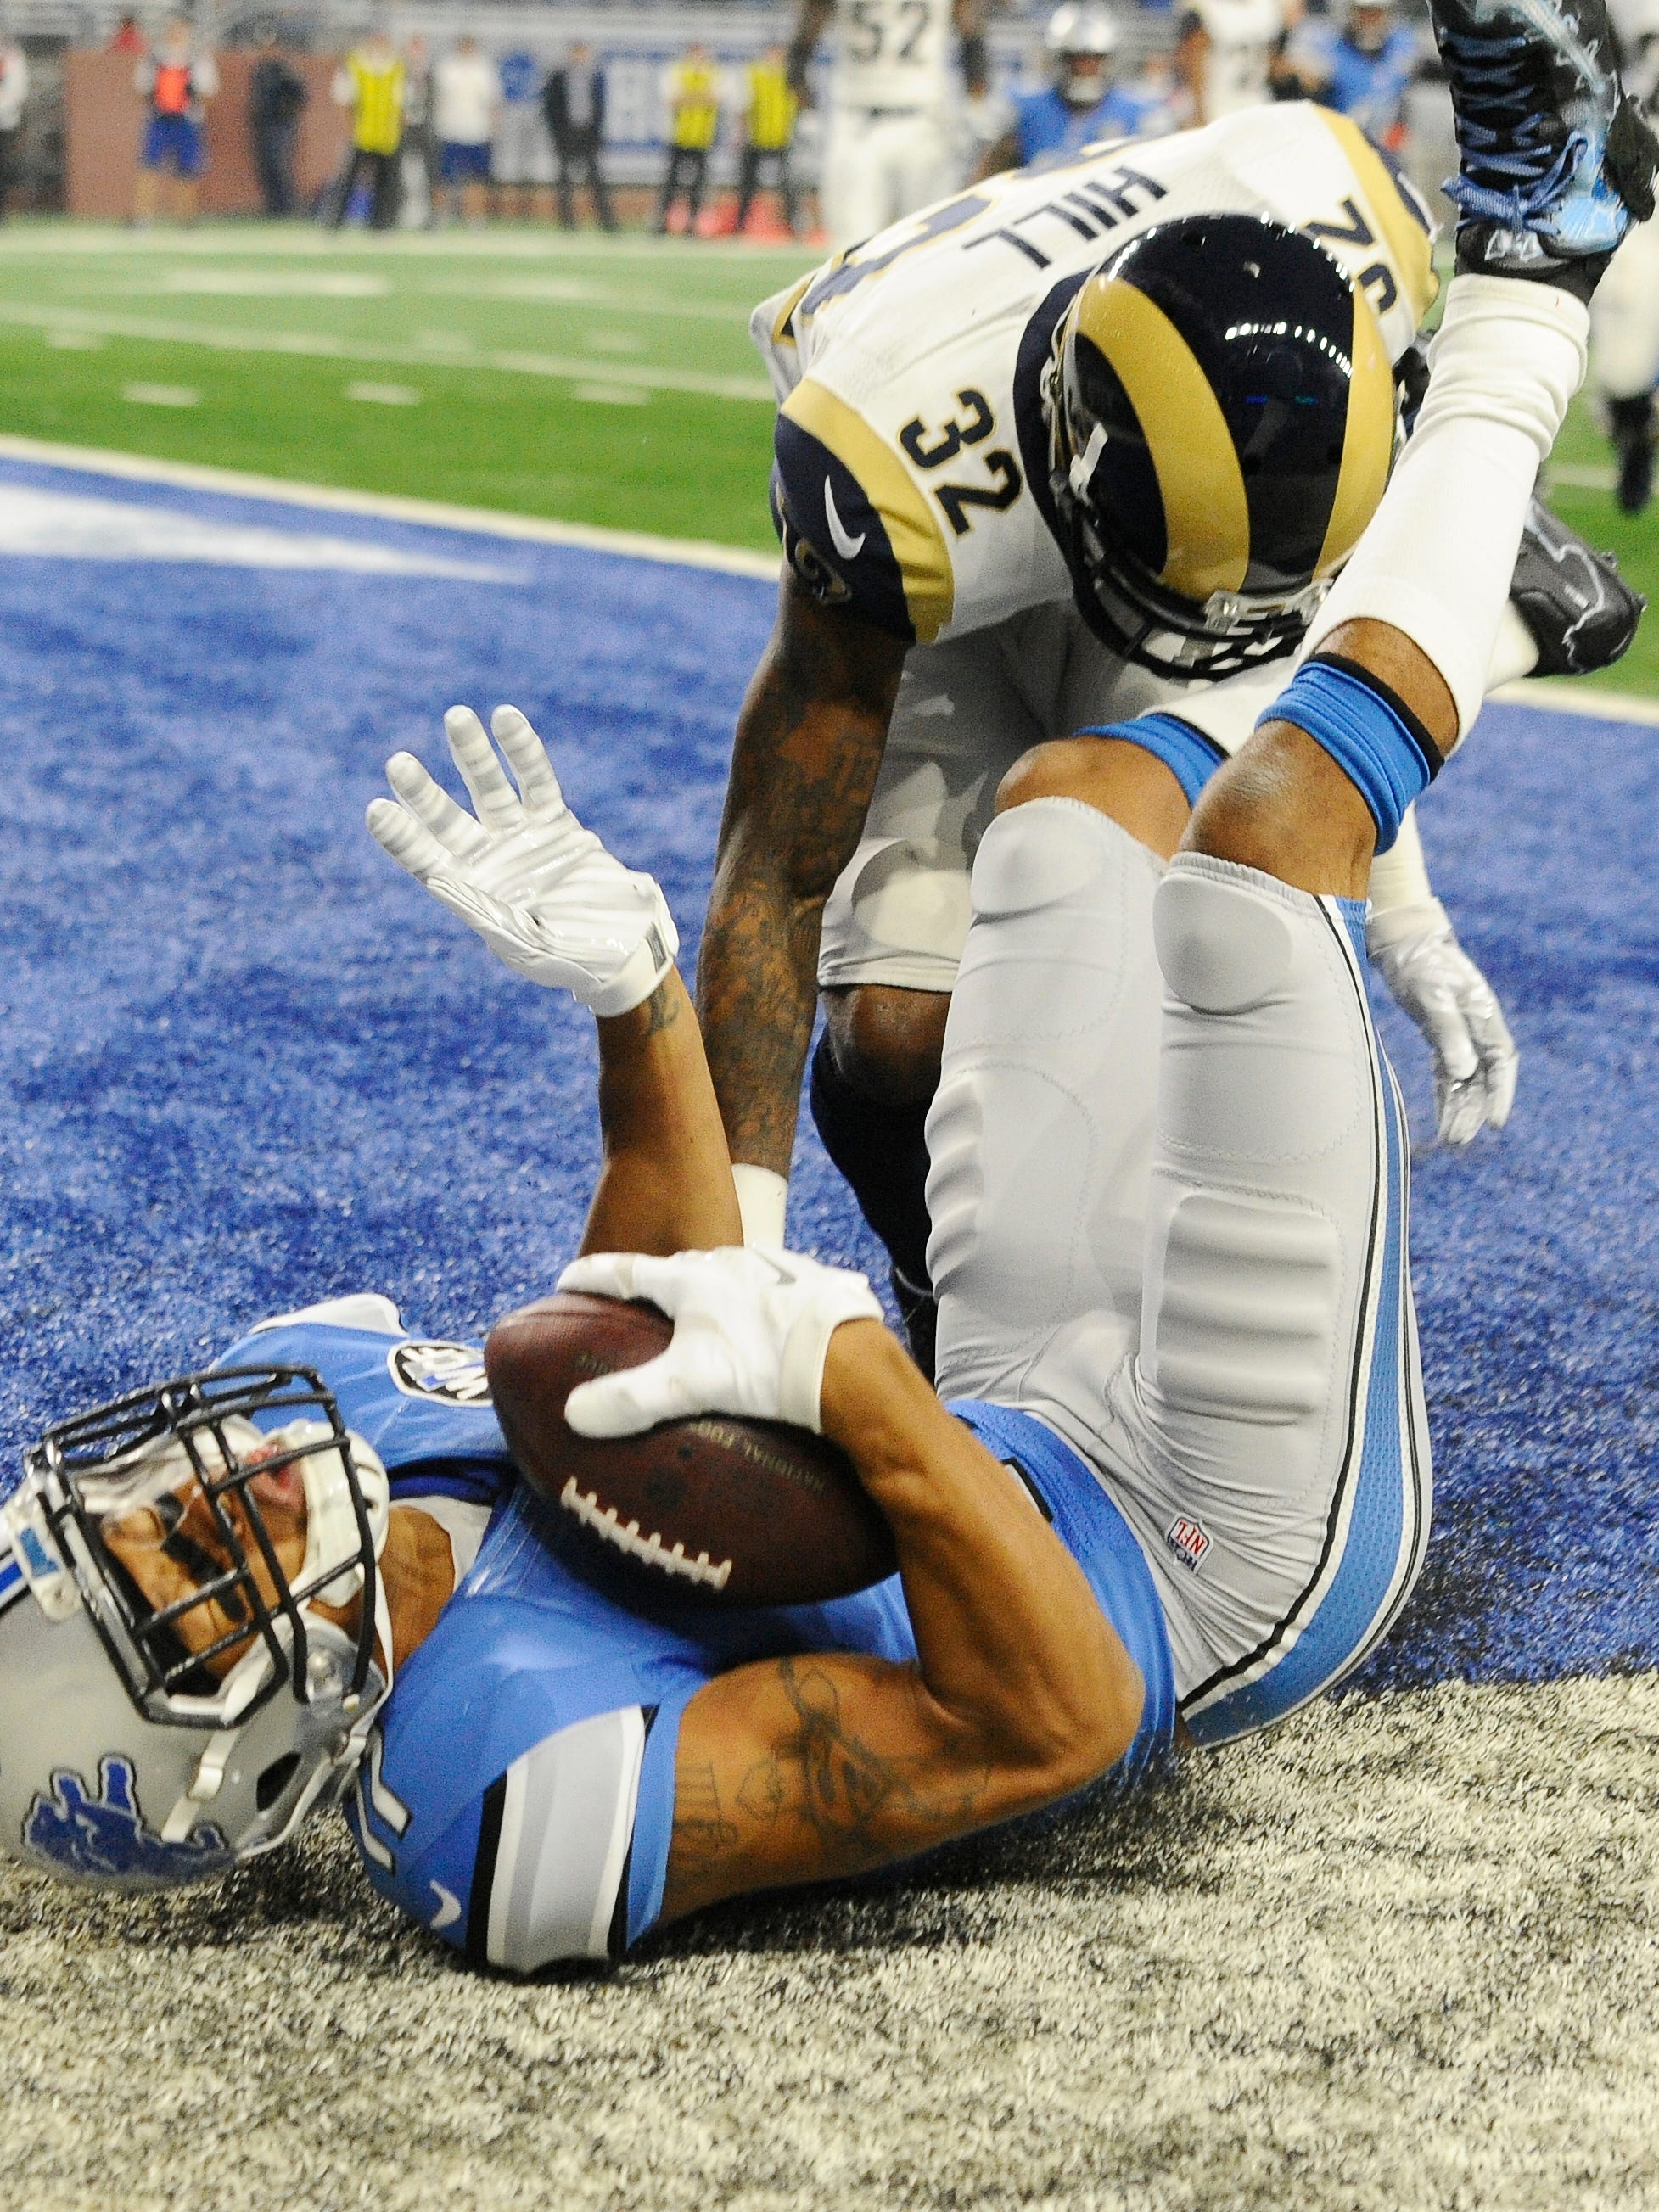 Coming down hard, Lions' Marvin Jones Jr. hits the ground but is able to hang onto  a reception in the end zone for a touchdown in the first quarter.